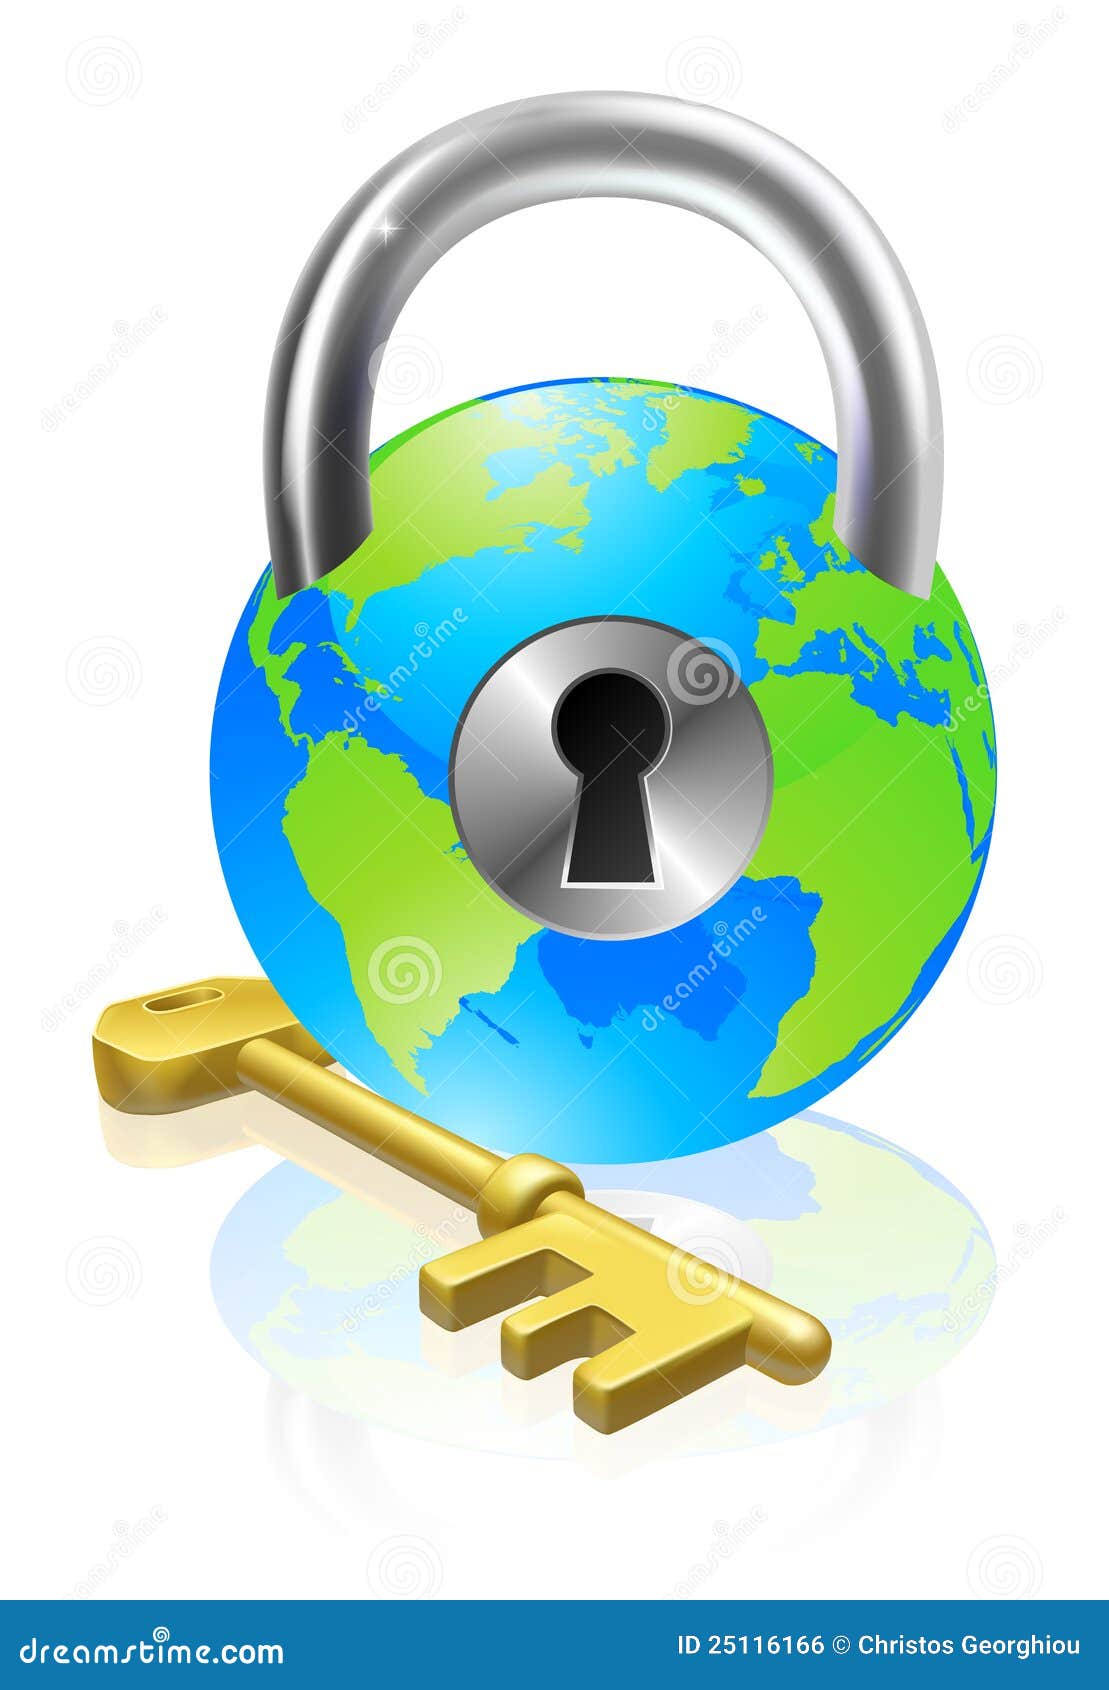 Lock and Key Globe stock vector. Illustration of protection - 25116166